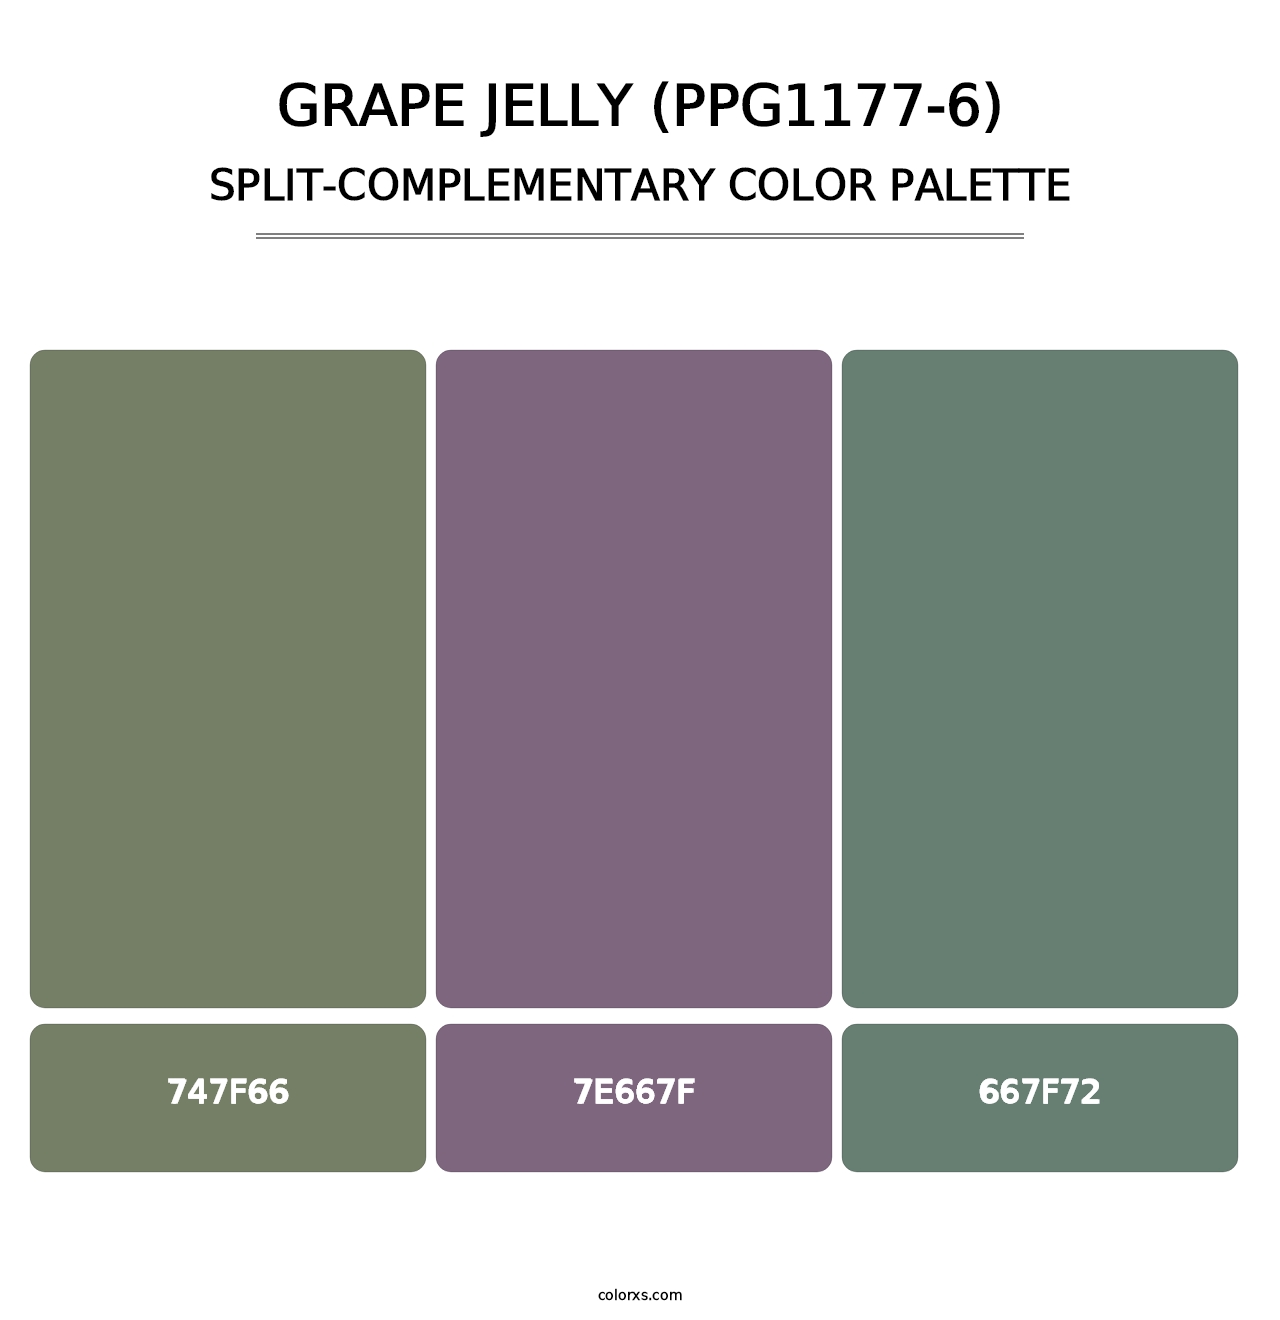 Grape Jelly (PPG1177-6) - Split-Complementary Color Palette